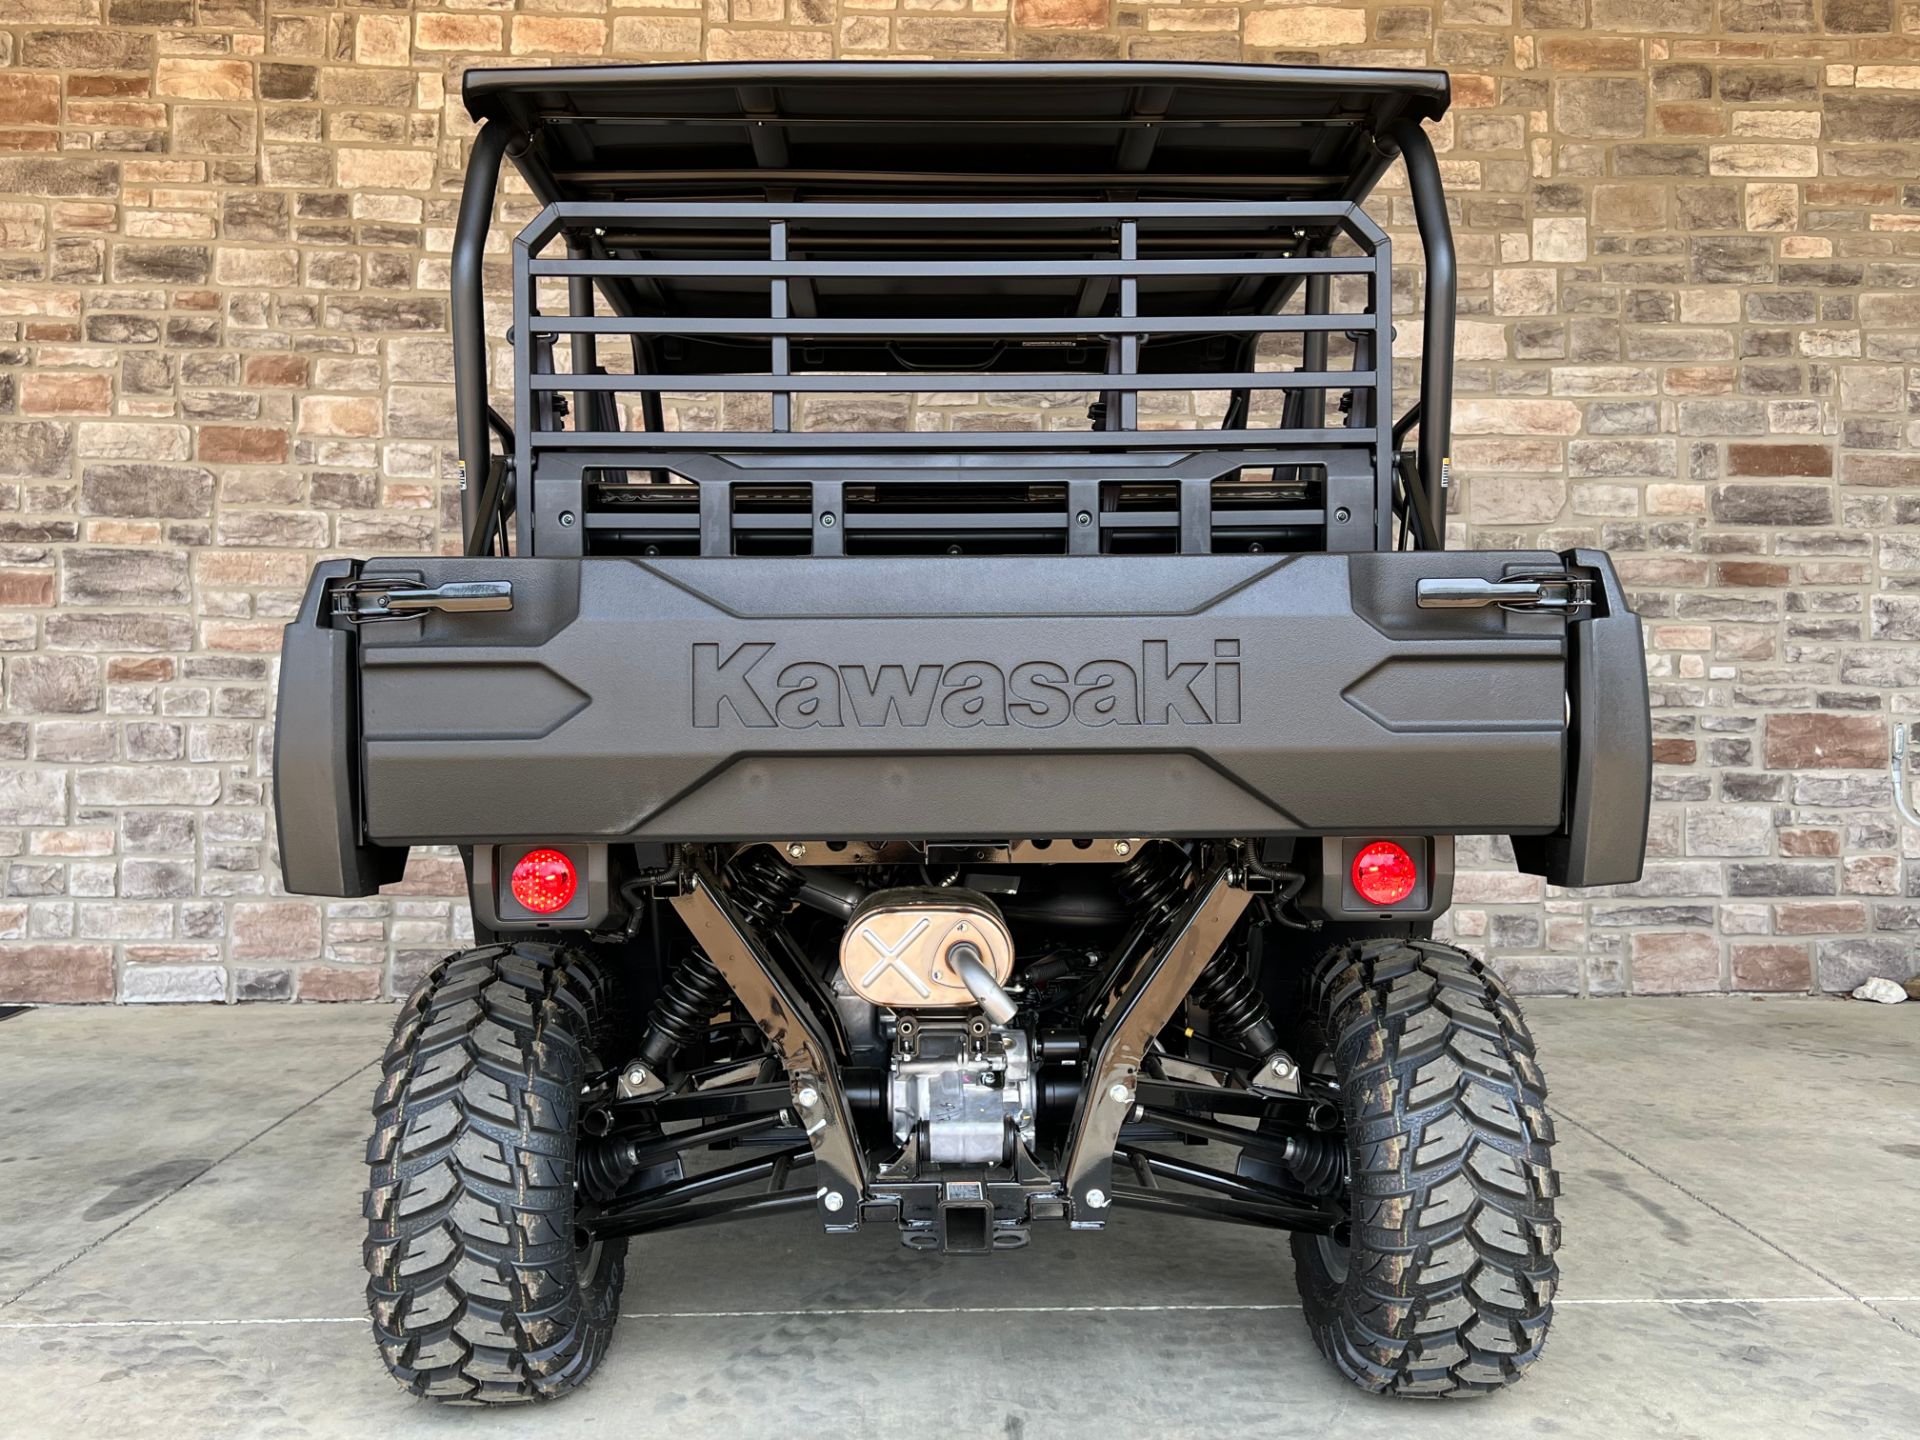 2022 Kawasaki Mule PRO-FXT Ranch Edition in Gainesville, Texas - Photo 6